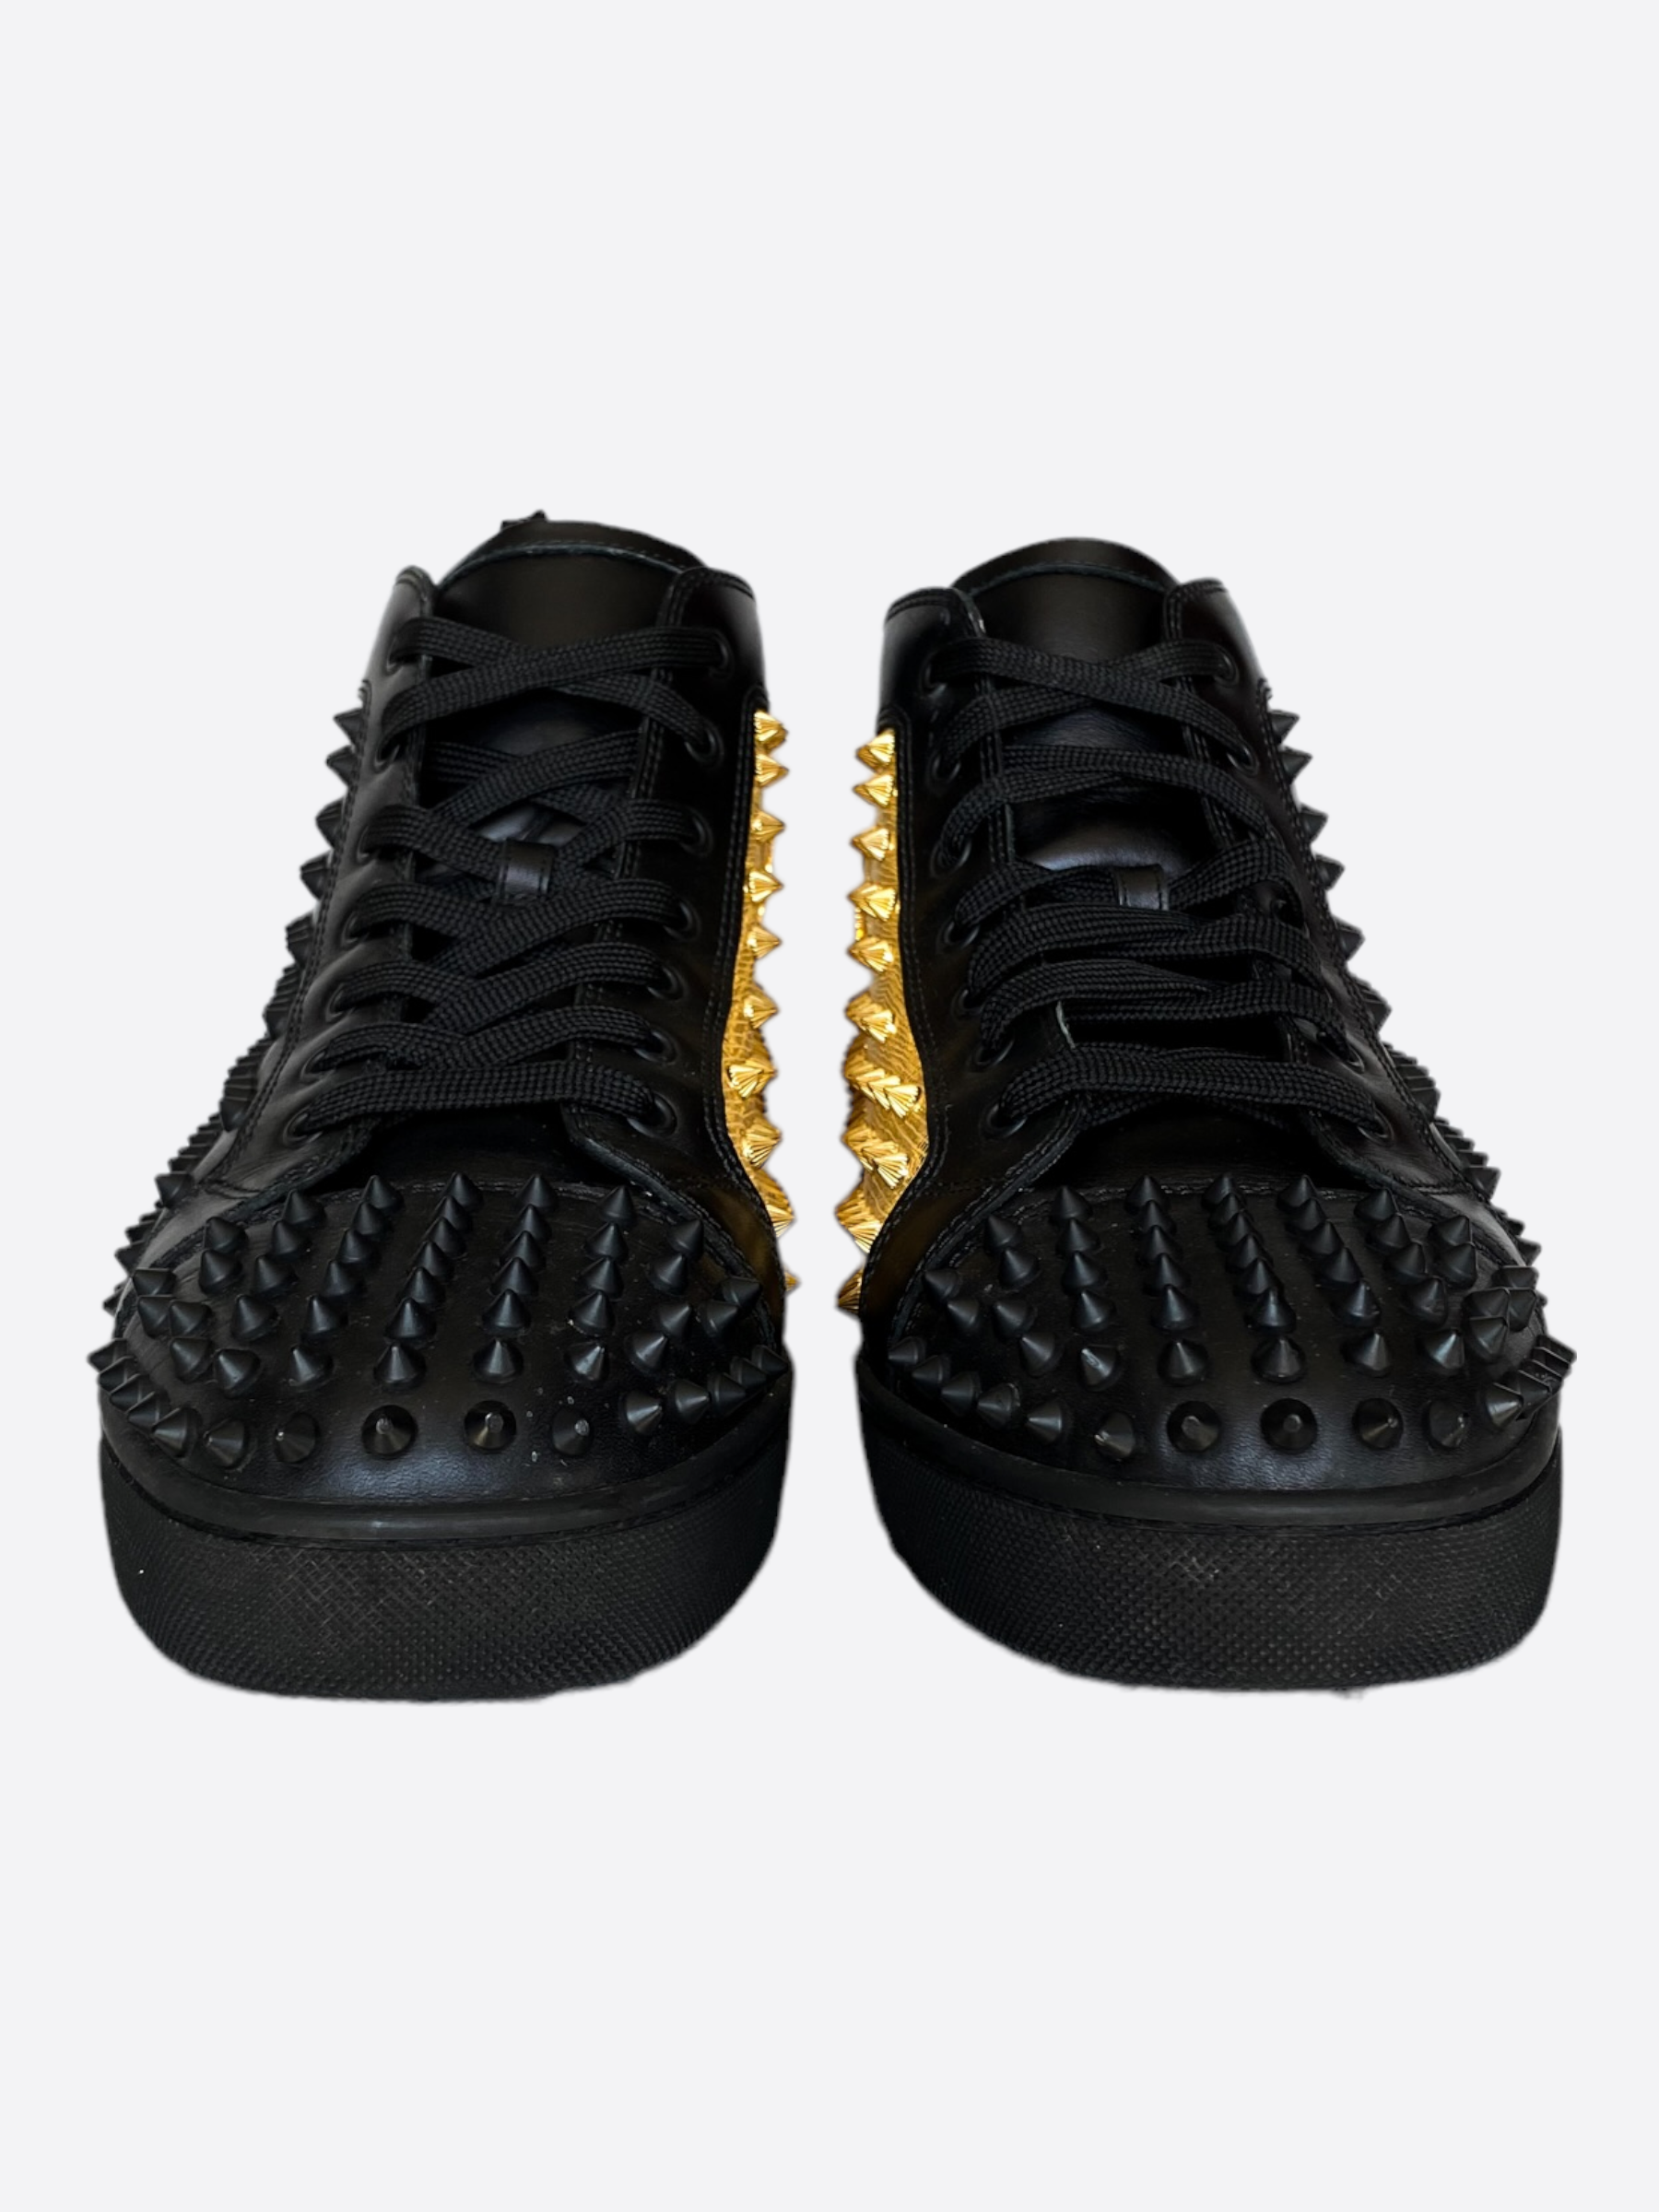 High Top Black Diamond Gold Nails Real Leather Red Bottom Shoes